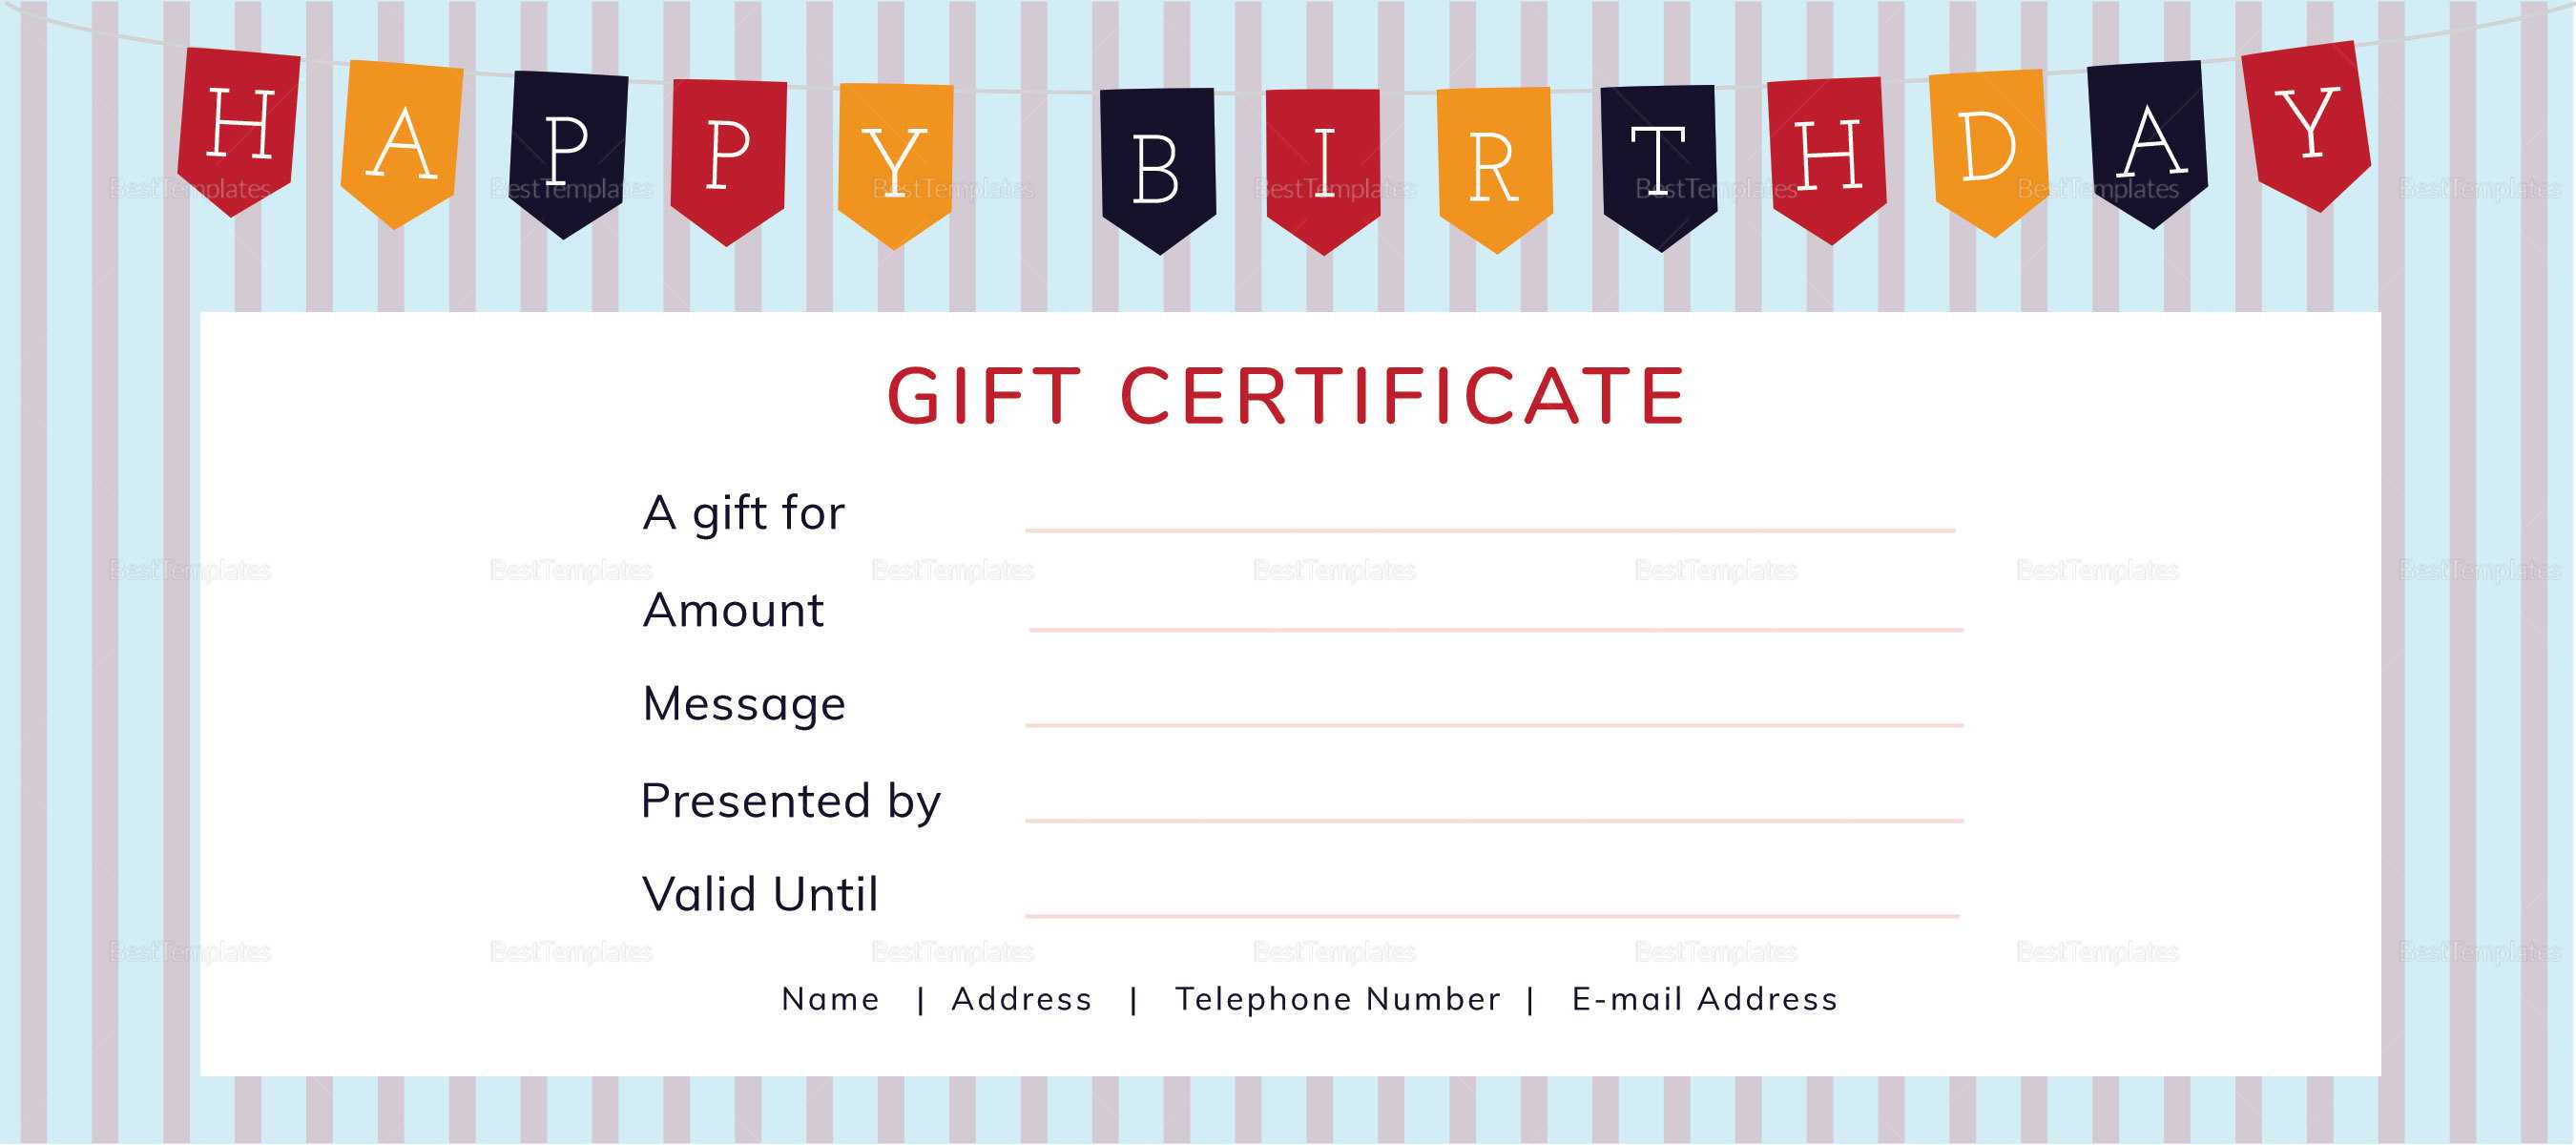 Happy Birthday Gift Certificate Template Intended For Indesign Gift Certificate Template